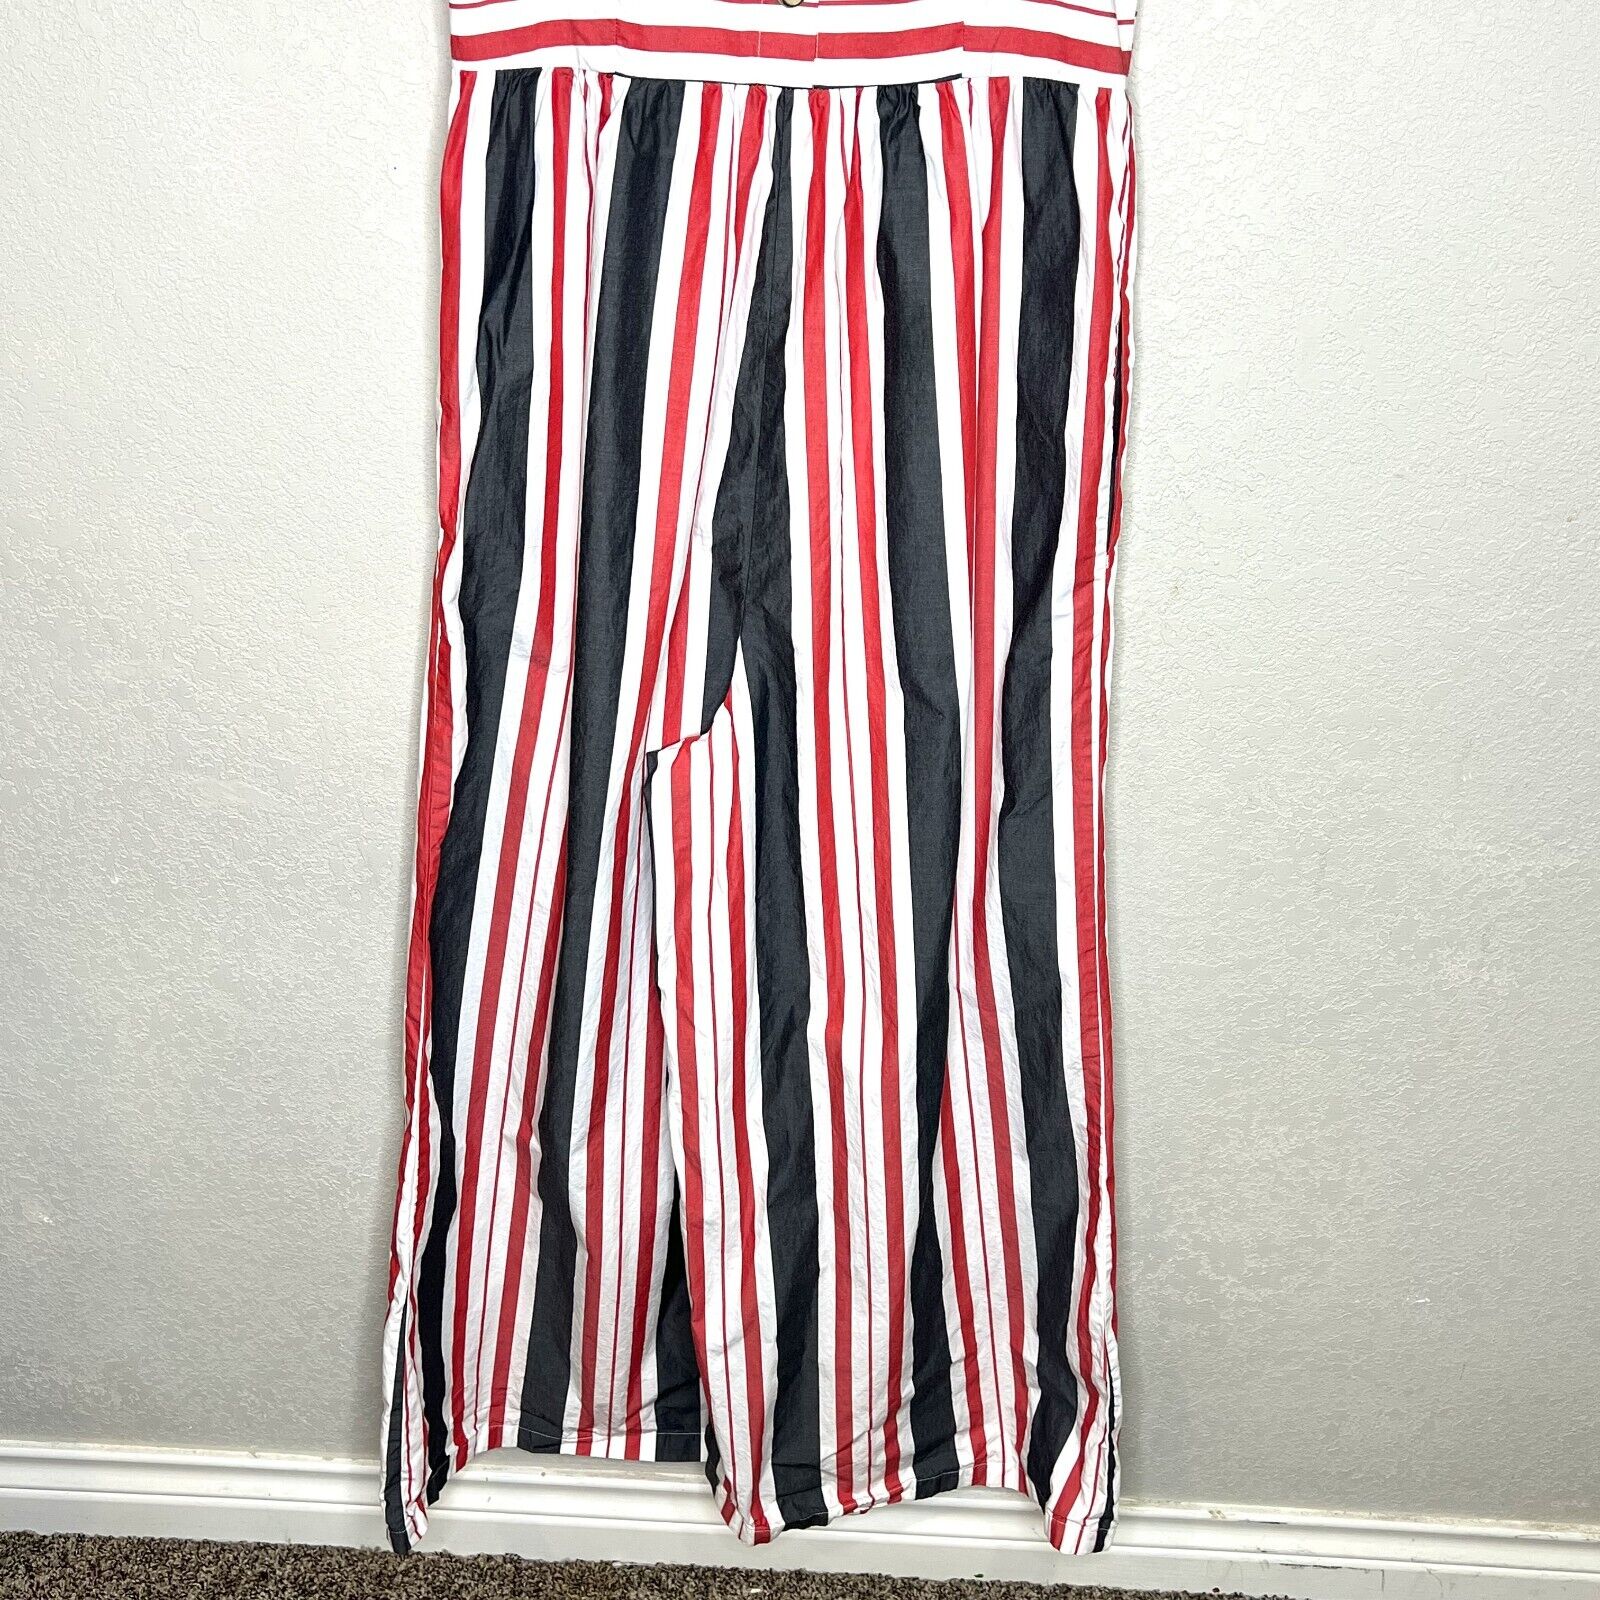 Anthropologie Maeve Striped Wide-Leg Jumpsuit Wide Leg Red White Grey Stripes XS